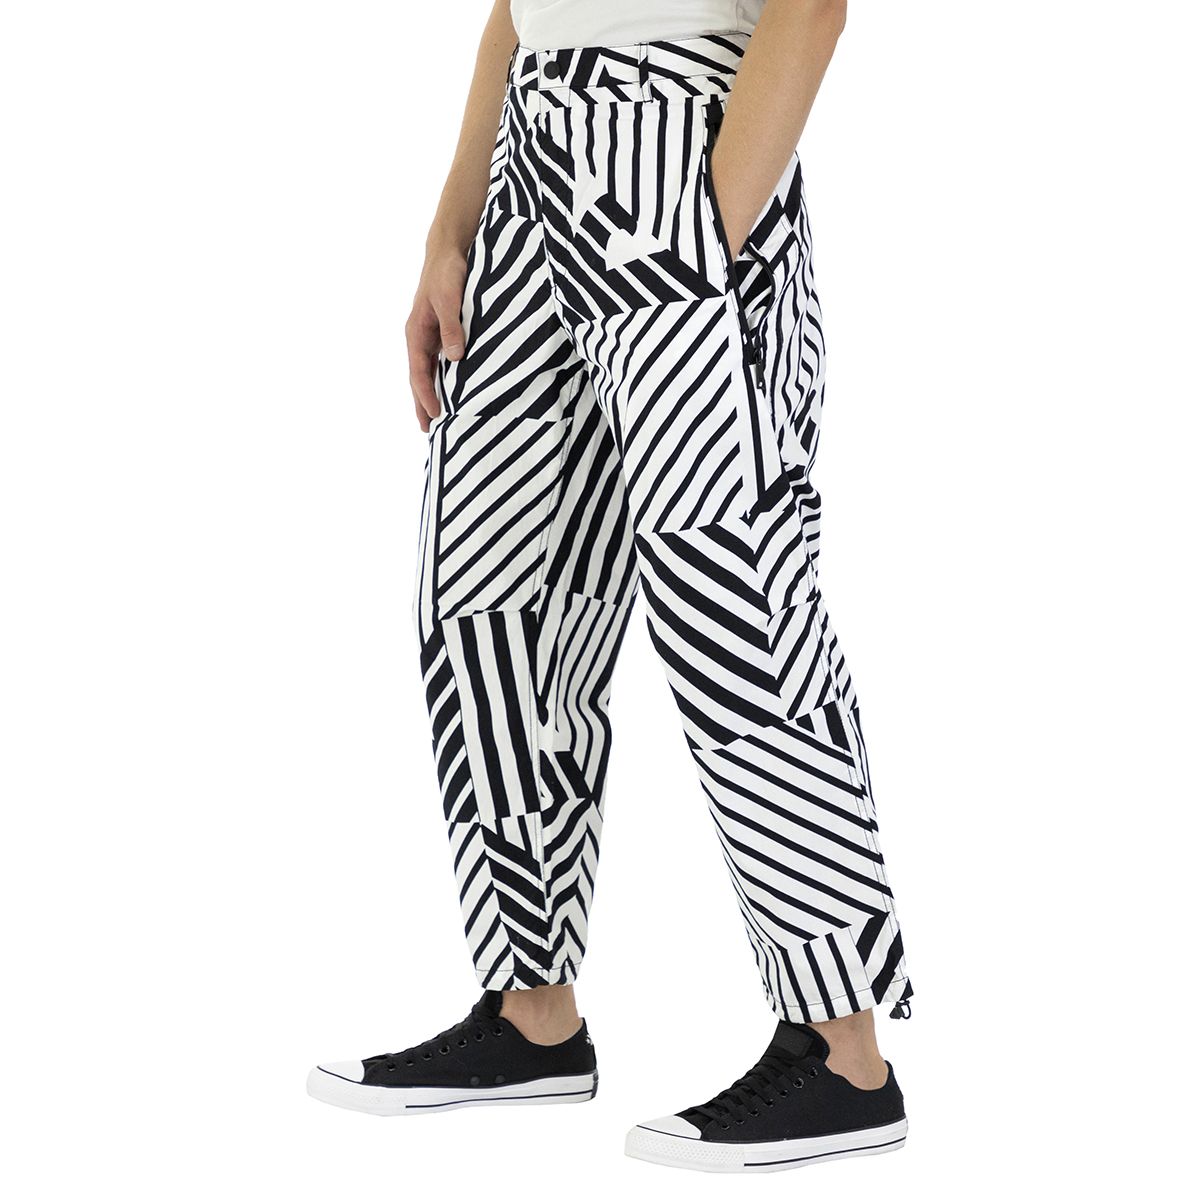 Emporio Armani 3Z1P961NRHZ-F135-46 Fall in love with the geometric pattern of these pants, which will give an extra touch to your casual outfit.